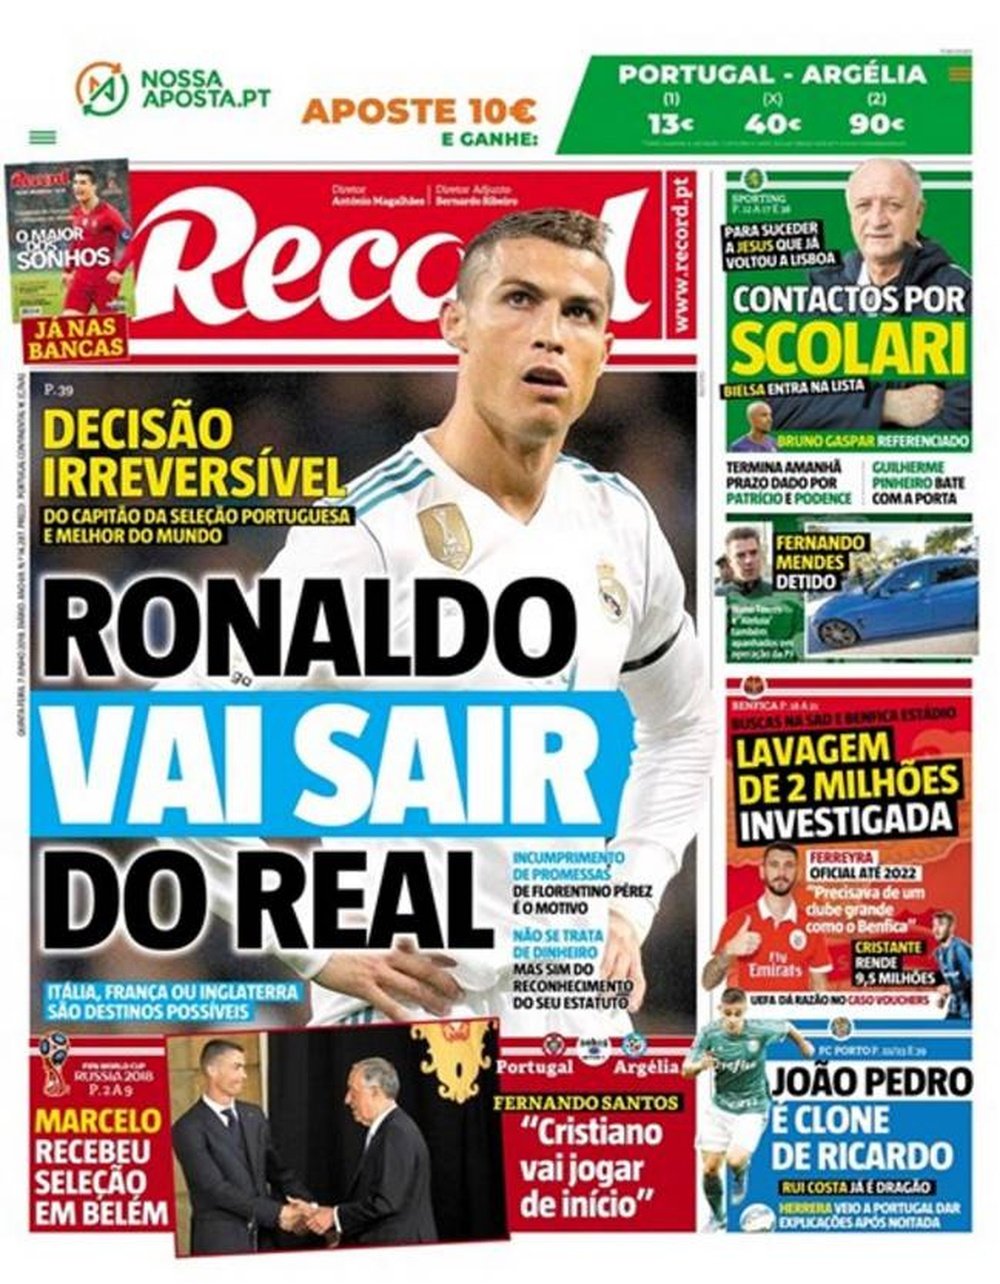 Is Ronaldo on his way out? Record